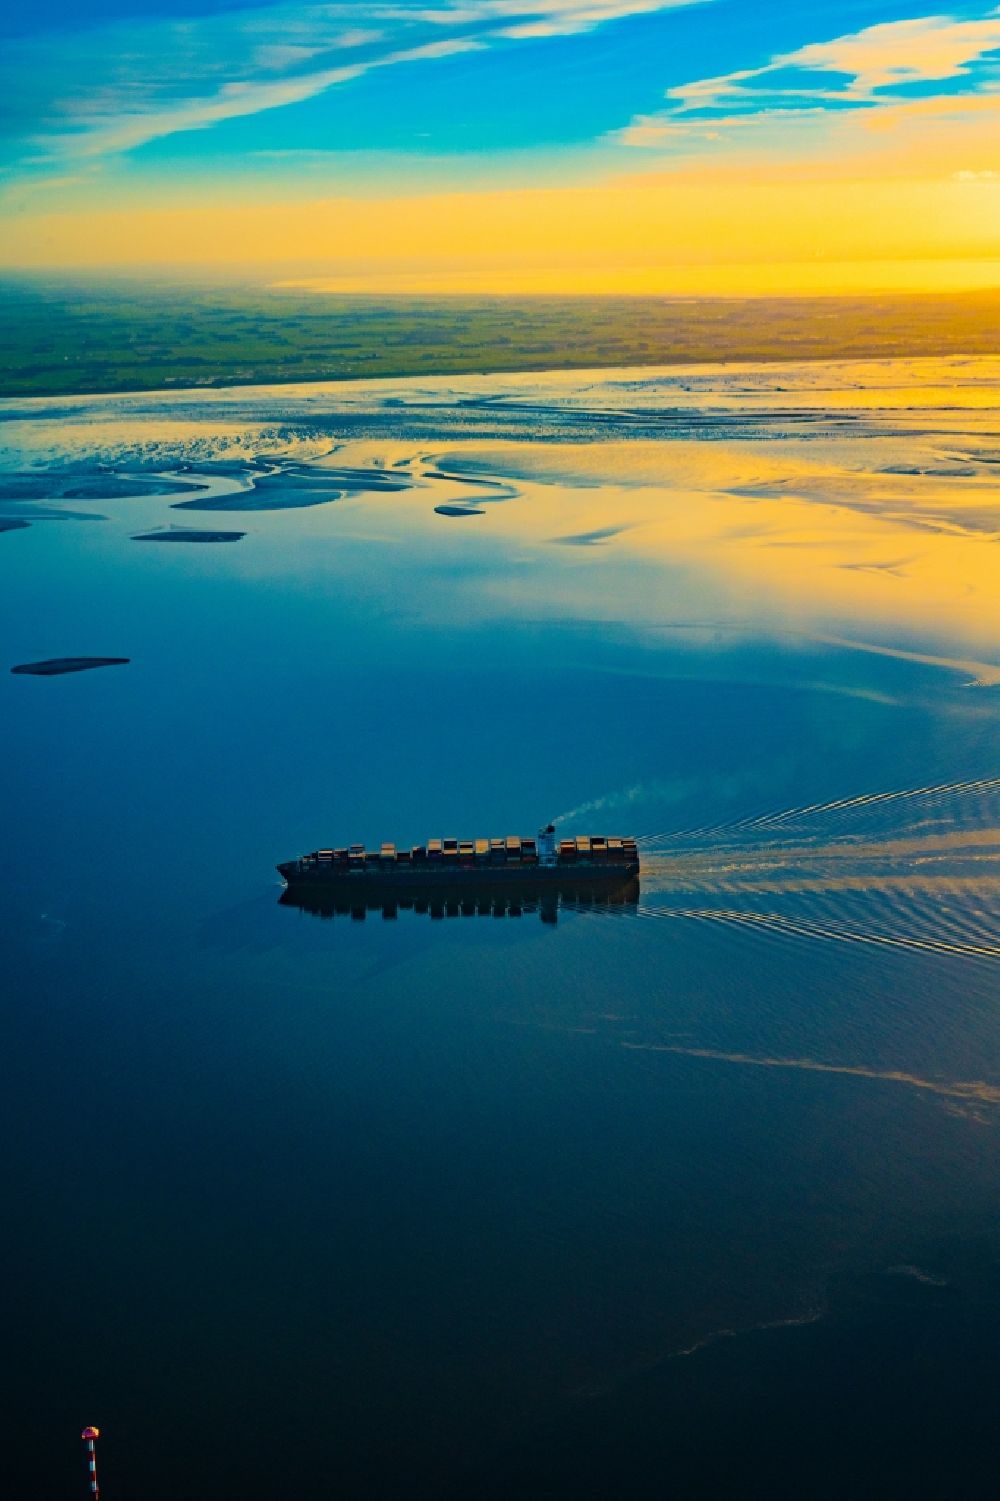 Aerial image Butjadingen - Moving container ship Maribor Maersk in the sunset in the Weser estuary in Butjadingen in the state Lower Saxony, Germany